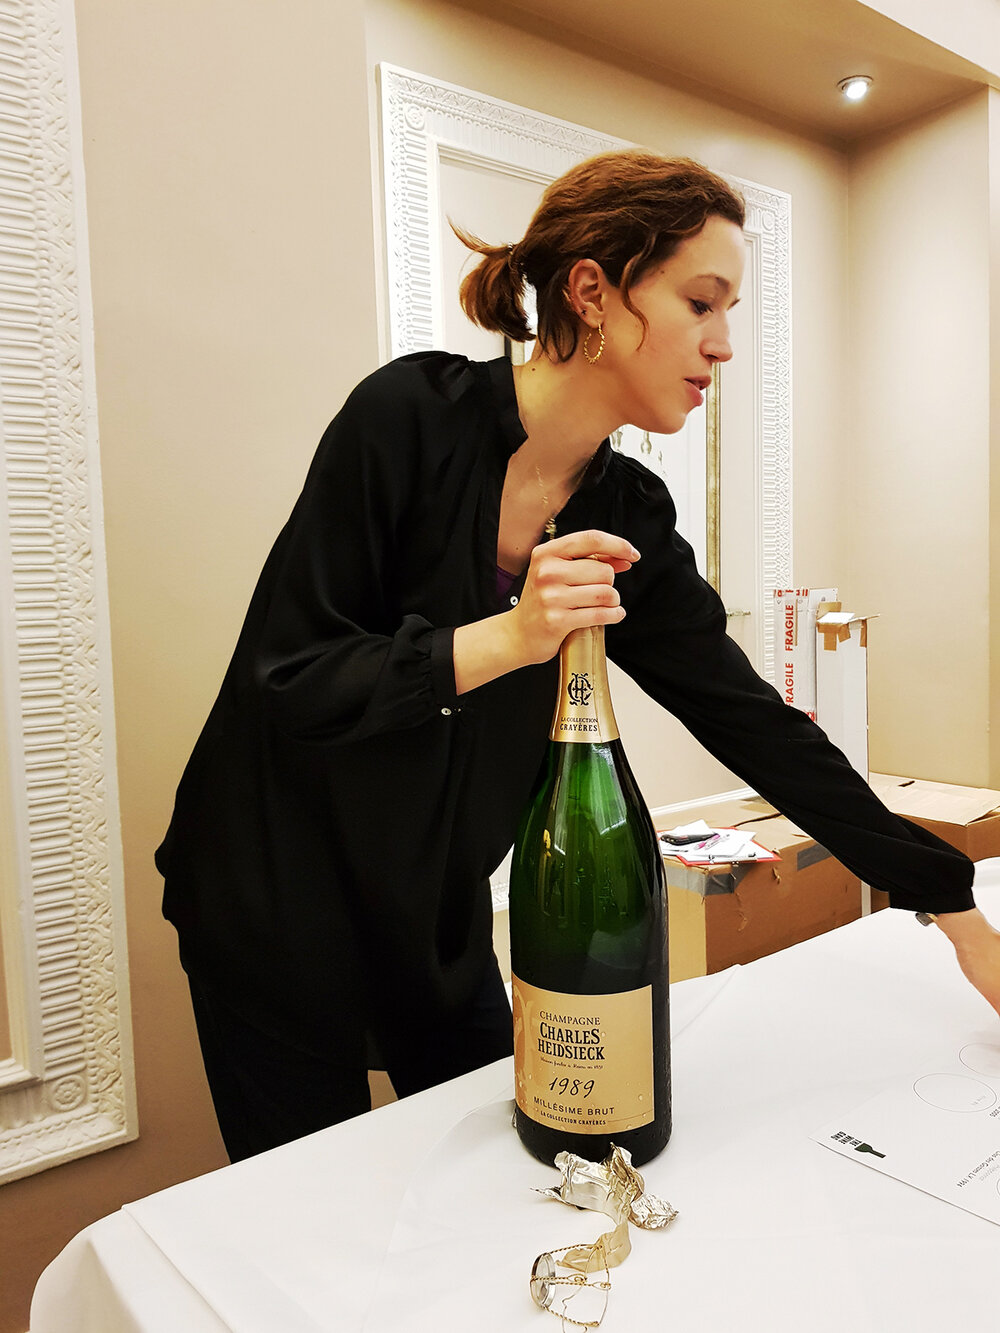  It’s not every day The Wine Gang’s Ines Salpico opens a Jeroboam like this. Rest assured: the Charles Heidsieck 1989 ‘Les Crayères’ was certainly not corked. One of the starts of the night.  